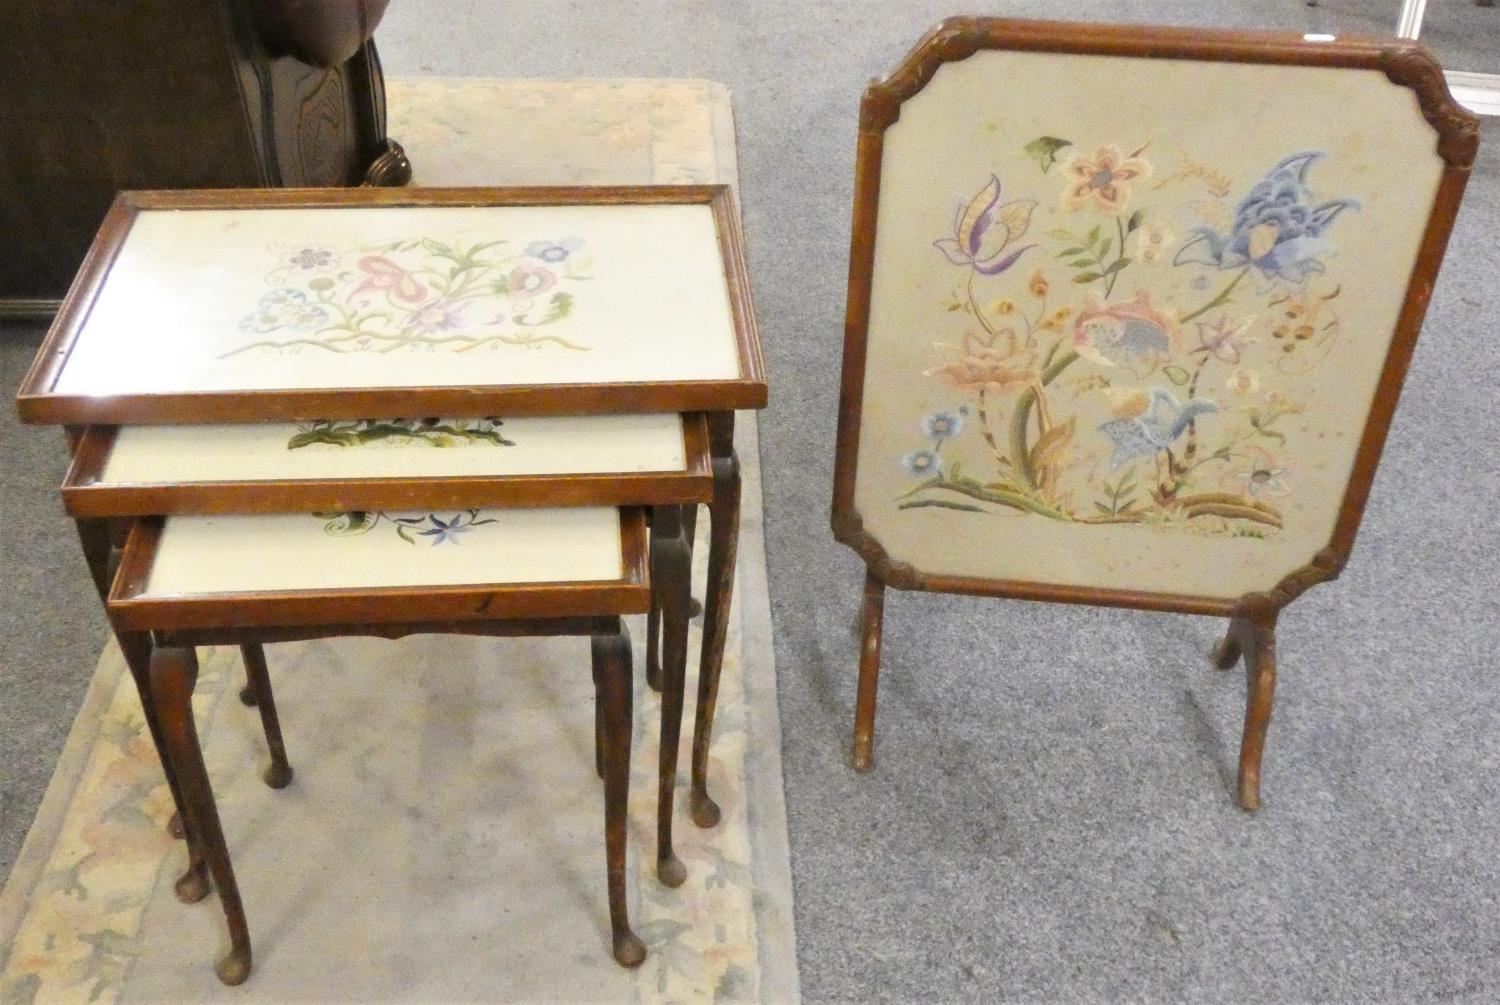 A mahogany fire screen table, the panel embroidered behind glass together with a nest of tables with